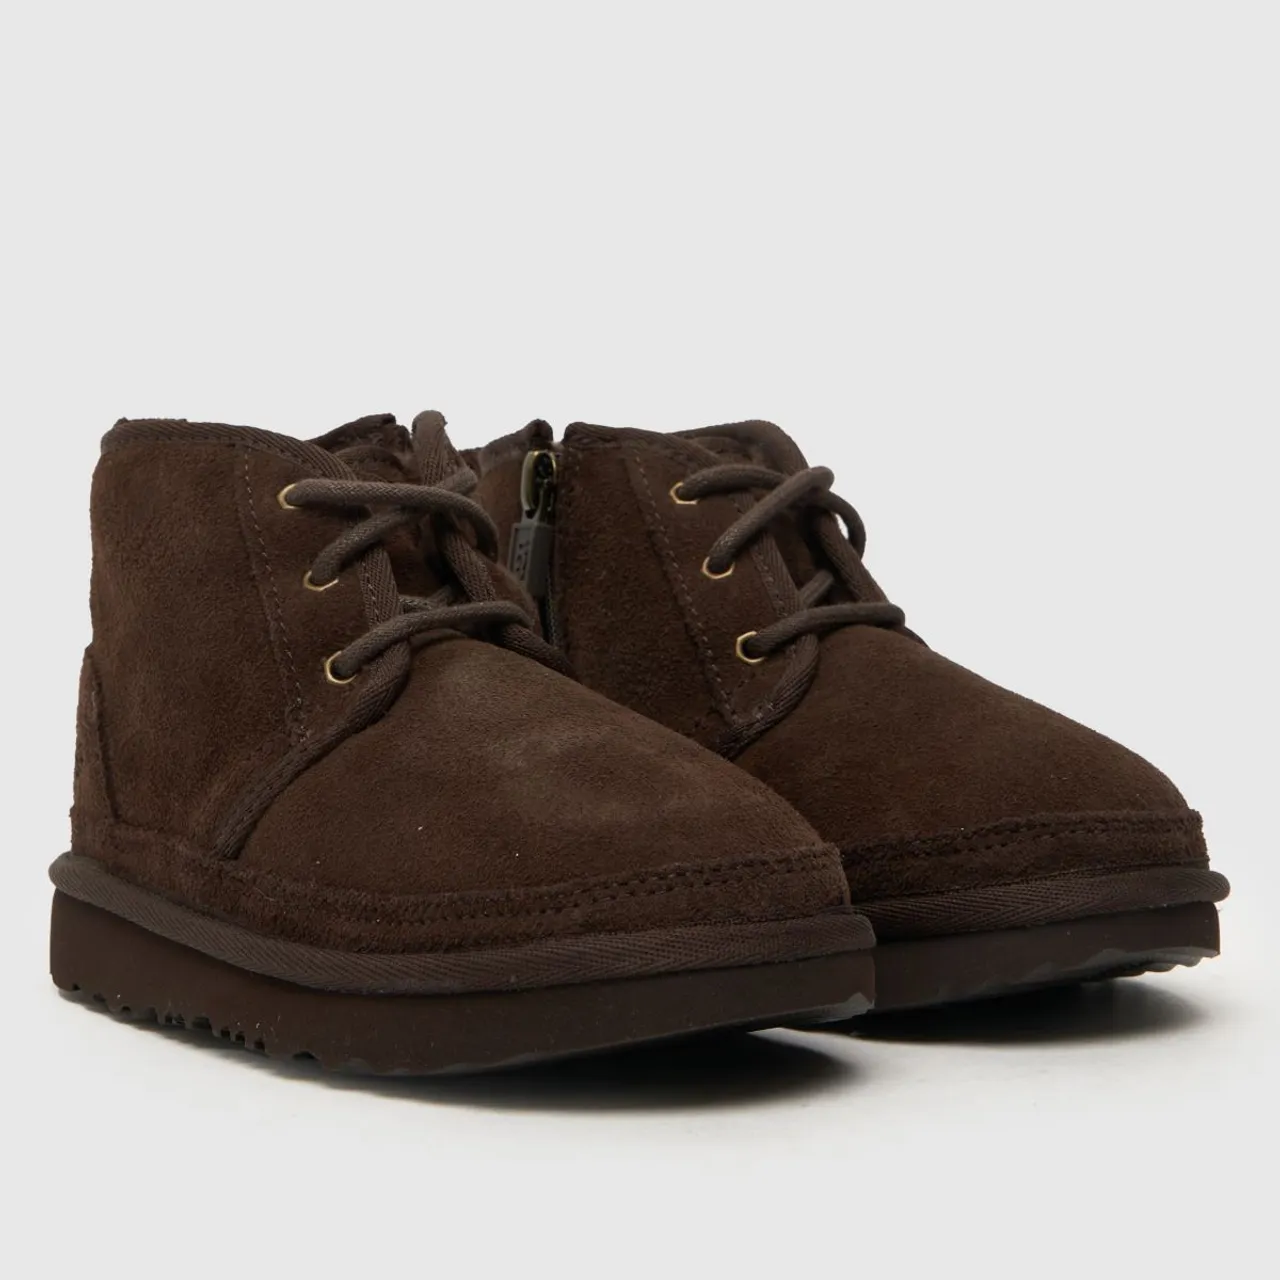 Ugg Dusted Cocoa Neumell Ii Boys Toddler Boots